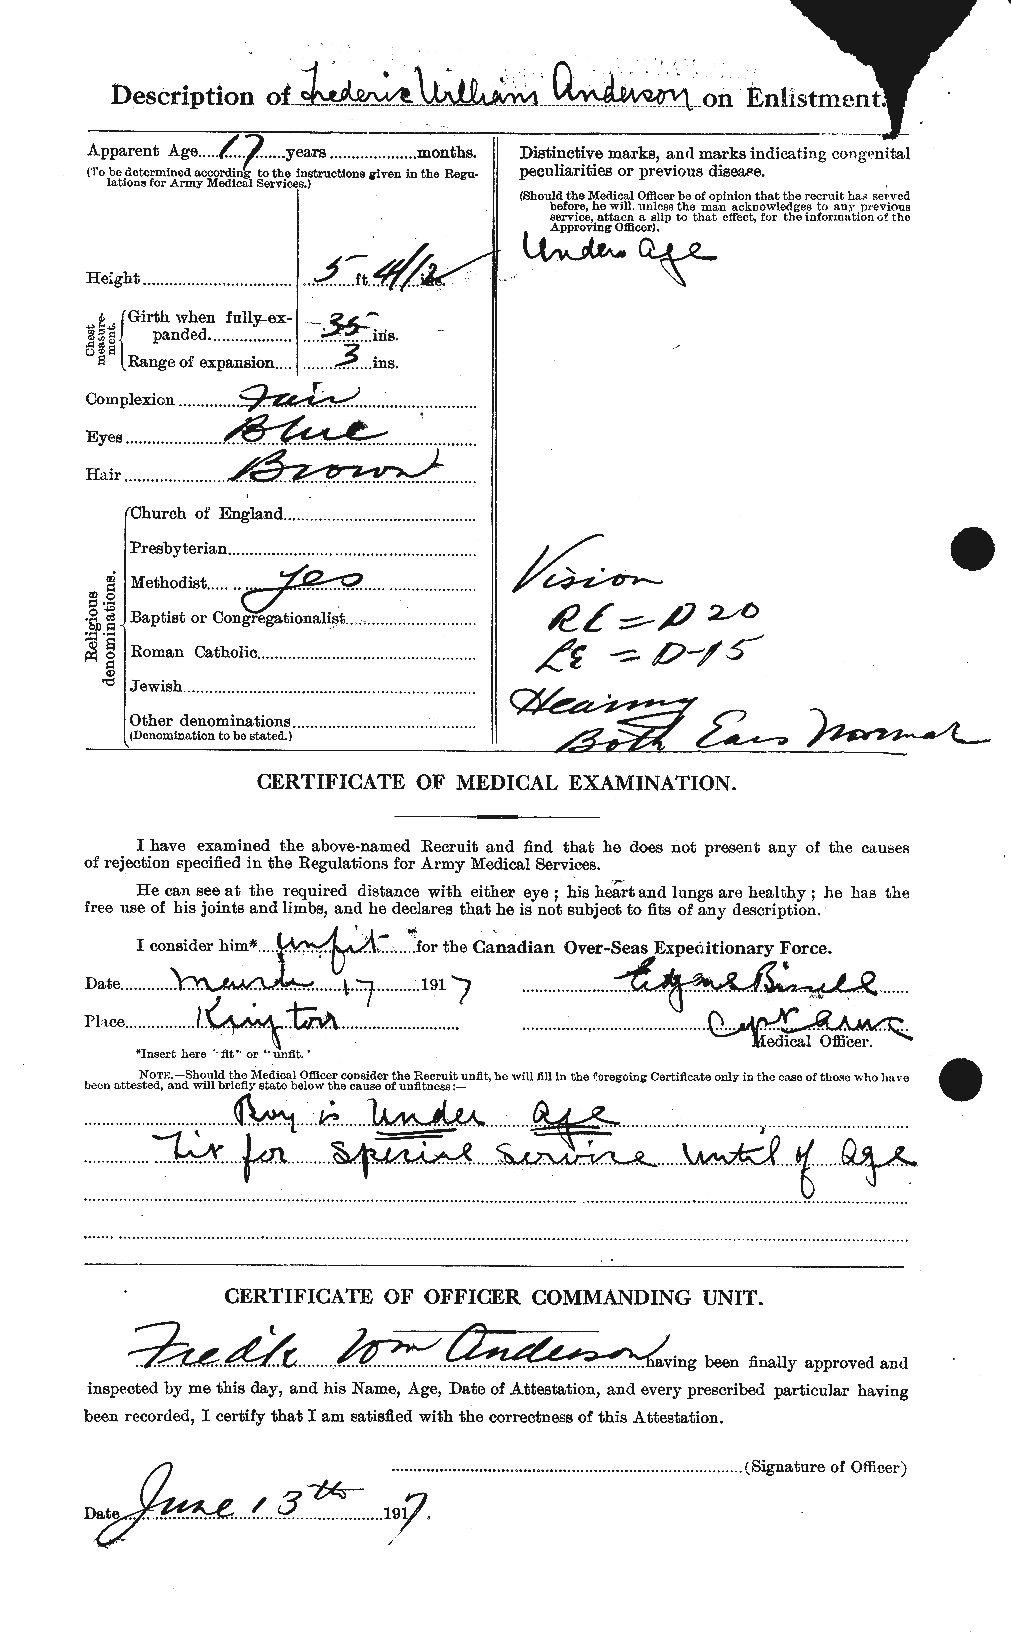 Personnel Records of the First World War - CEF 209802b